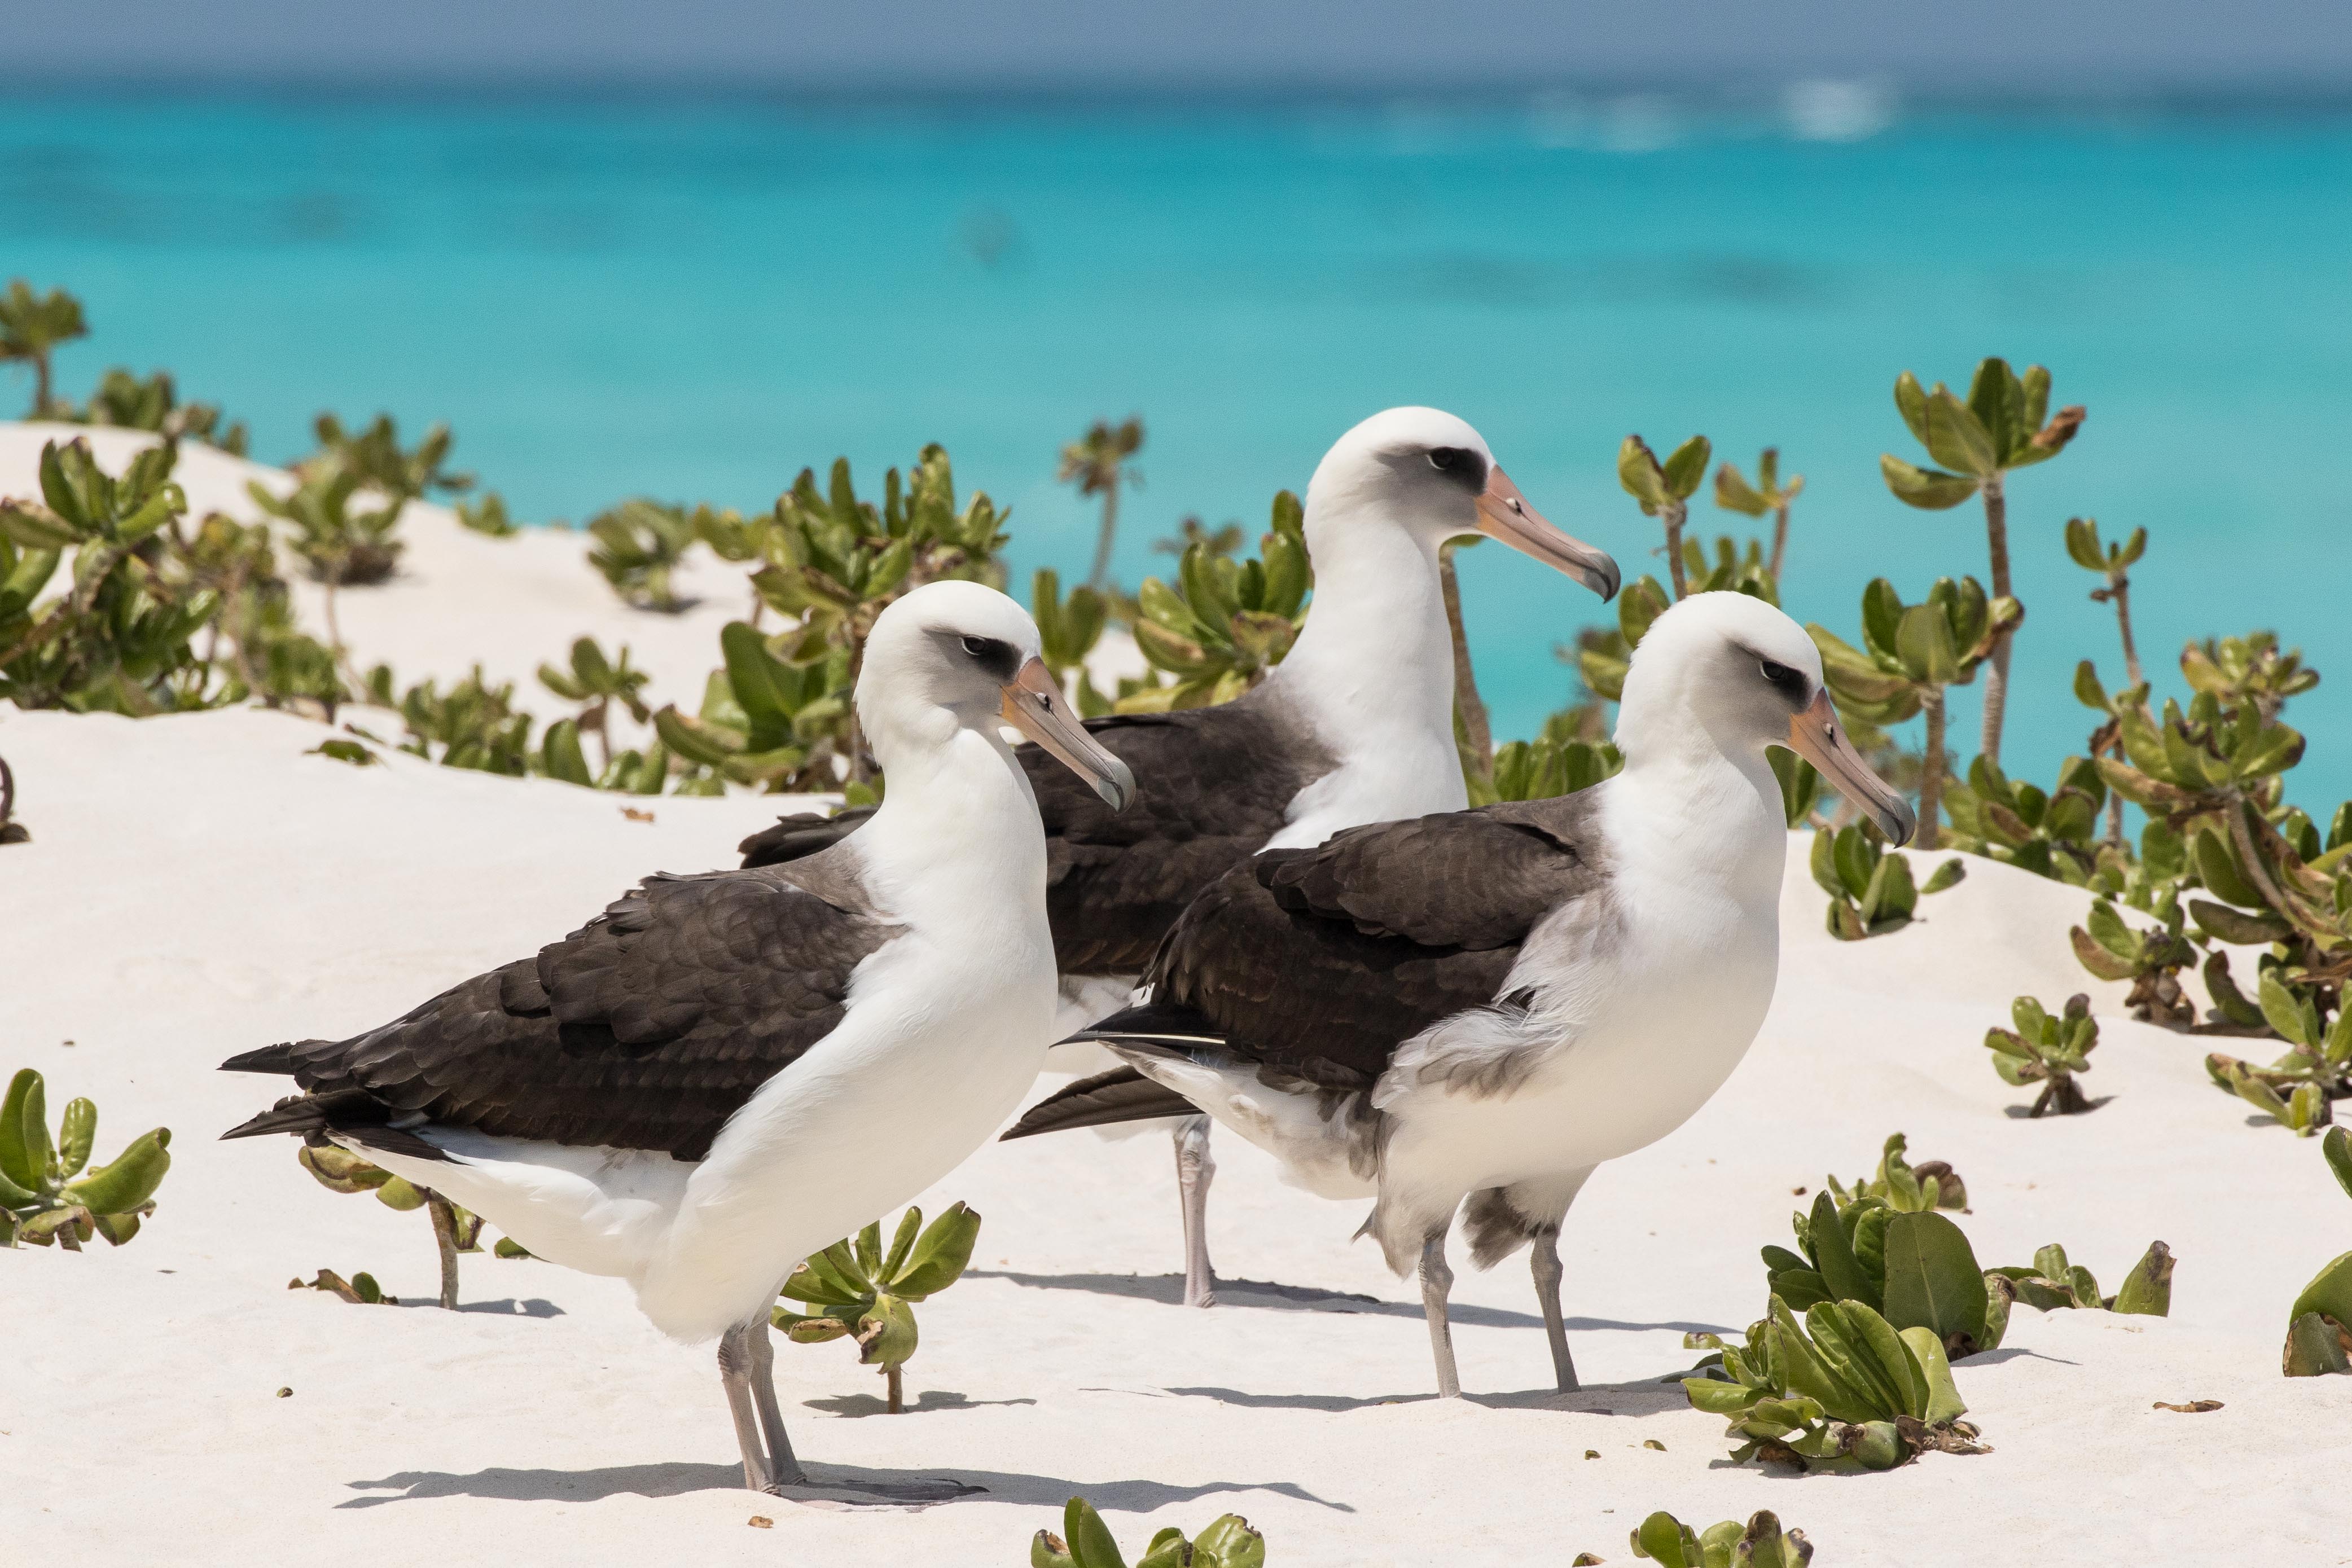 A group of three Laysan Albatross standing on the sandy shore of Midway Atoll. Photograph by Eric Vandewerf, taken April 2018.